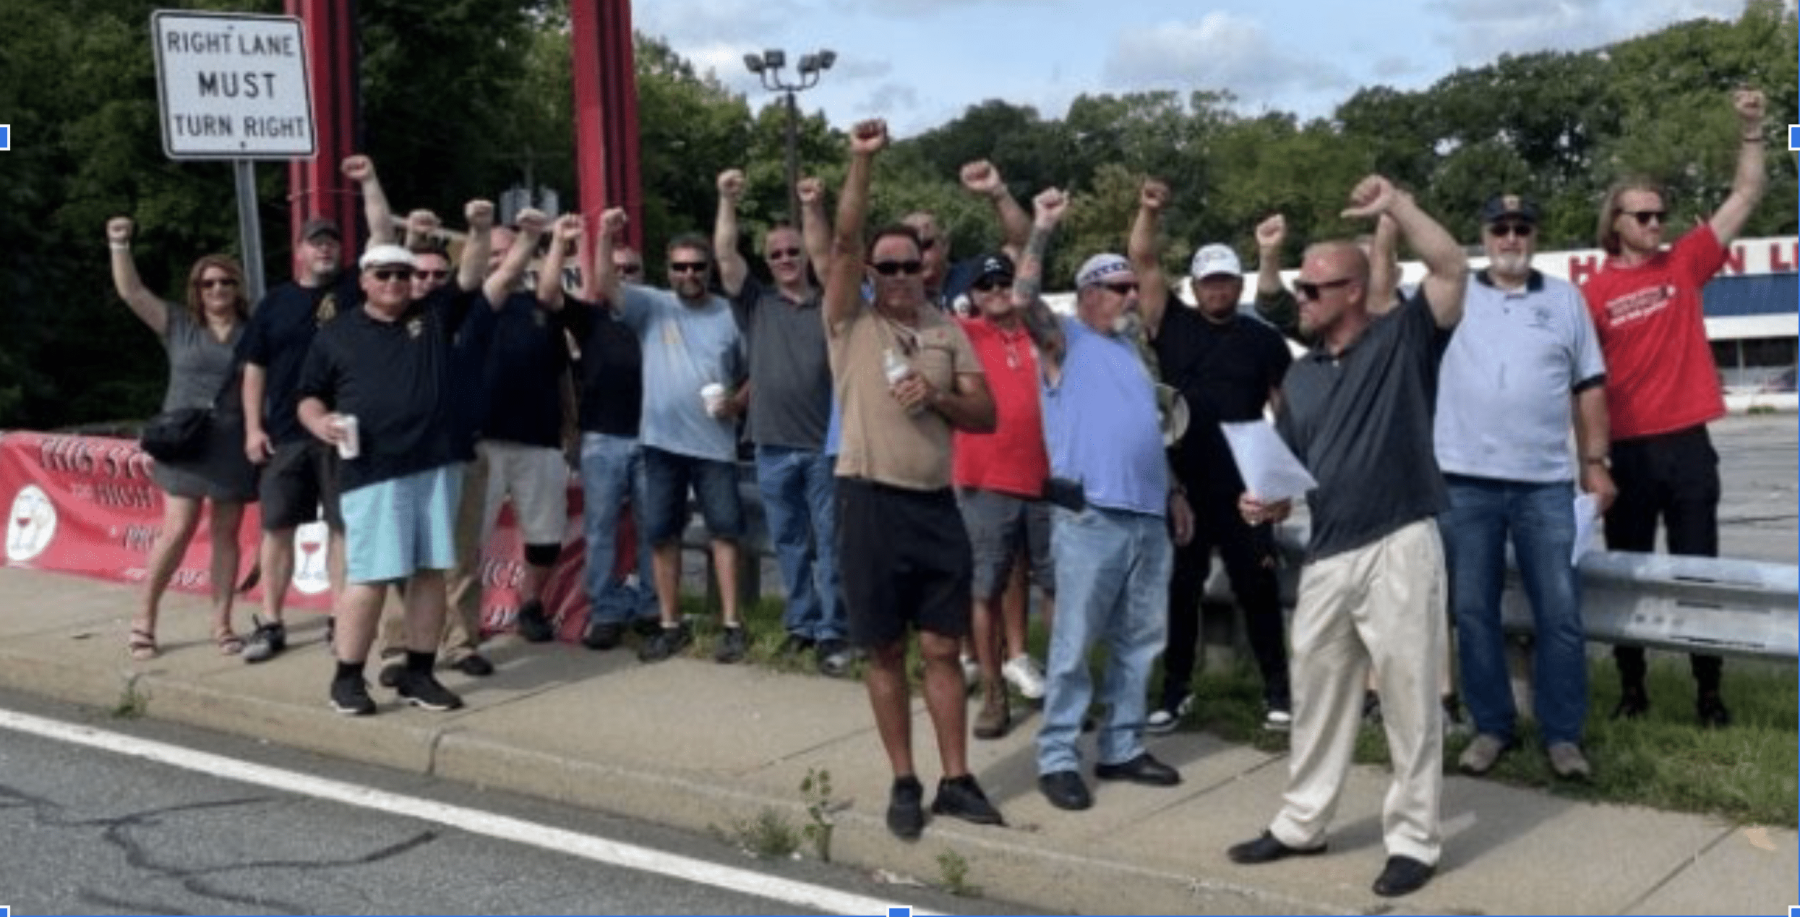 Rhode Island News: “Apathy is a Worker’s Disaster”: Teamsters 251 on the Johnson Brothers Strike, How you can help, and Why it matters